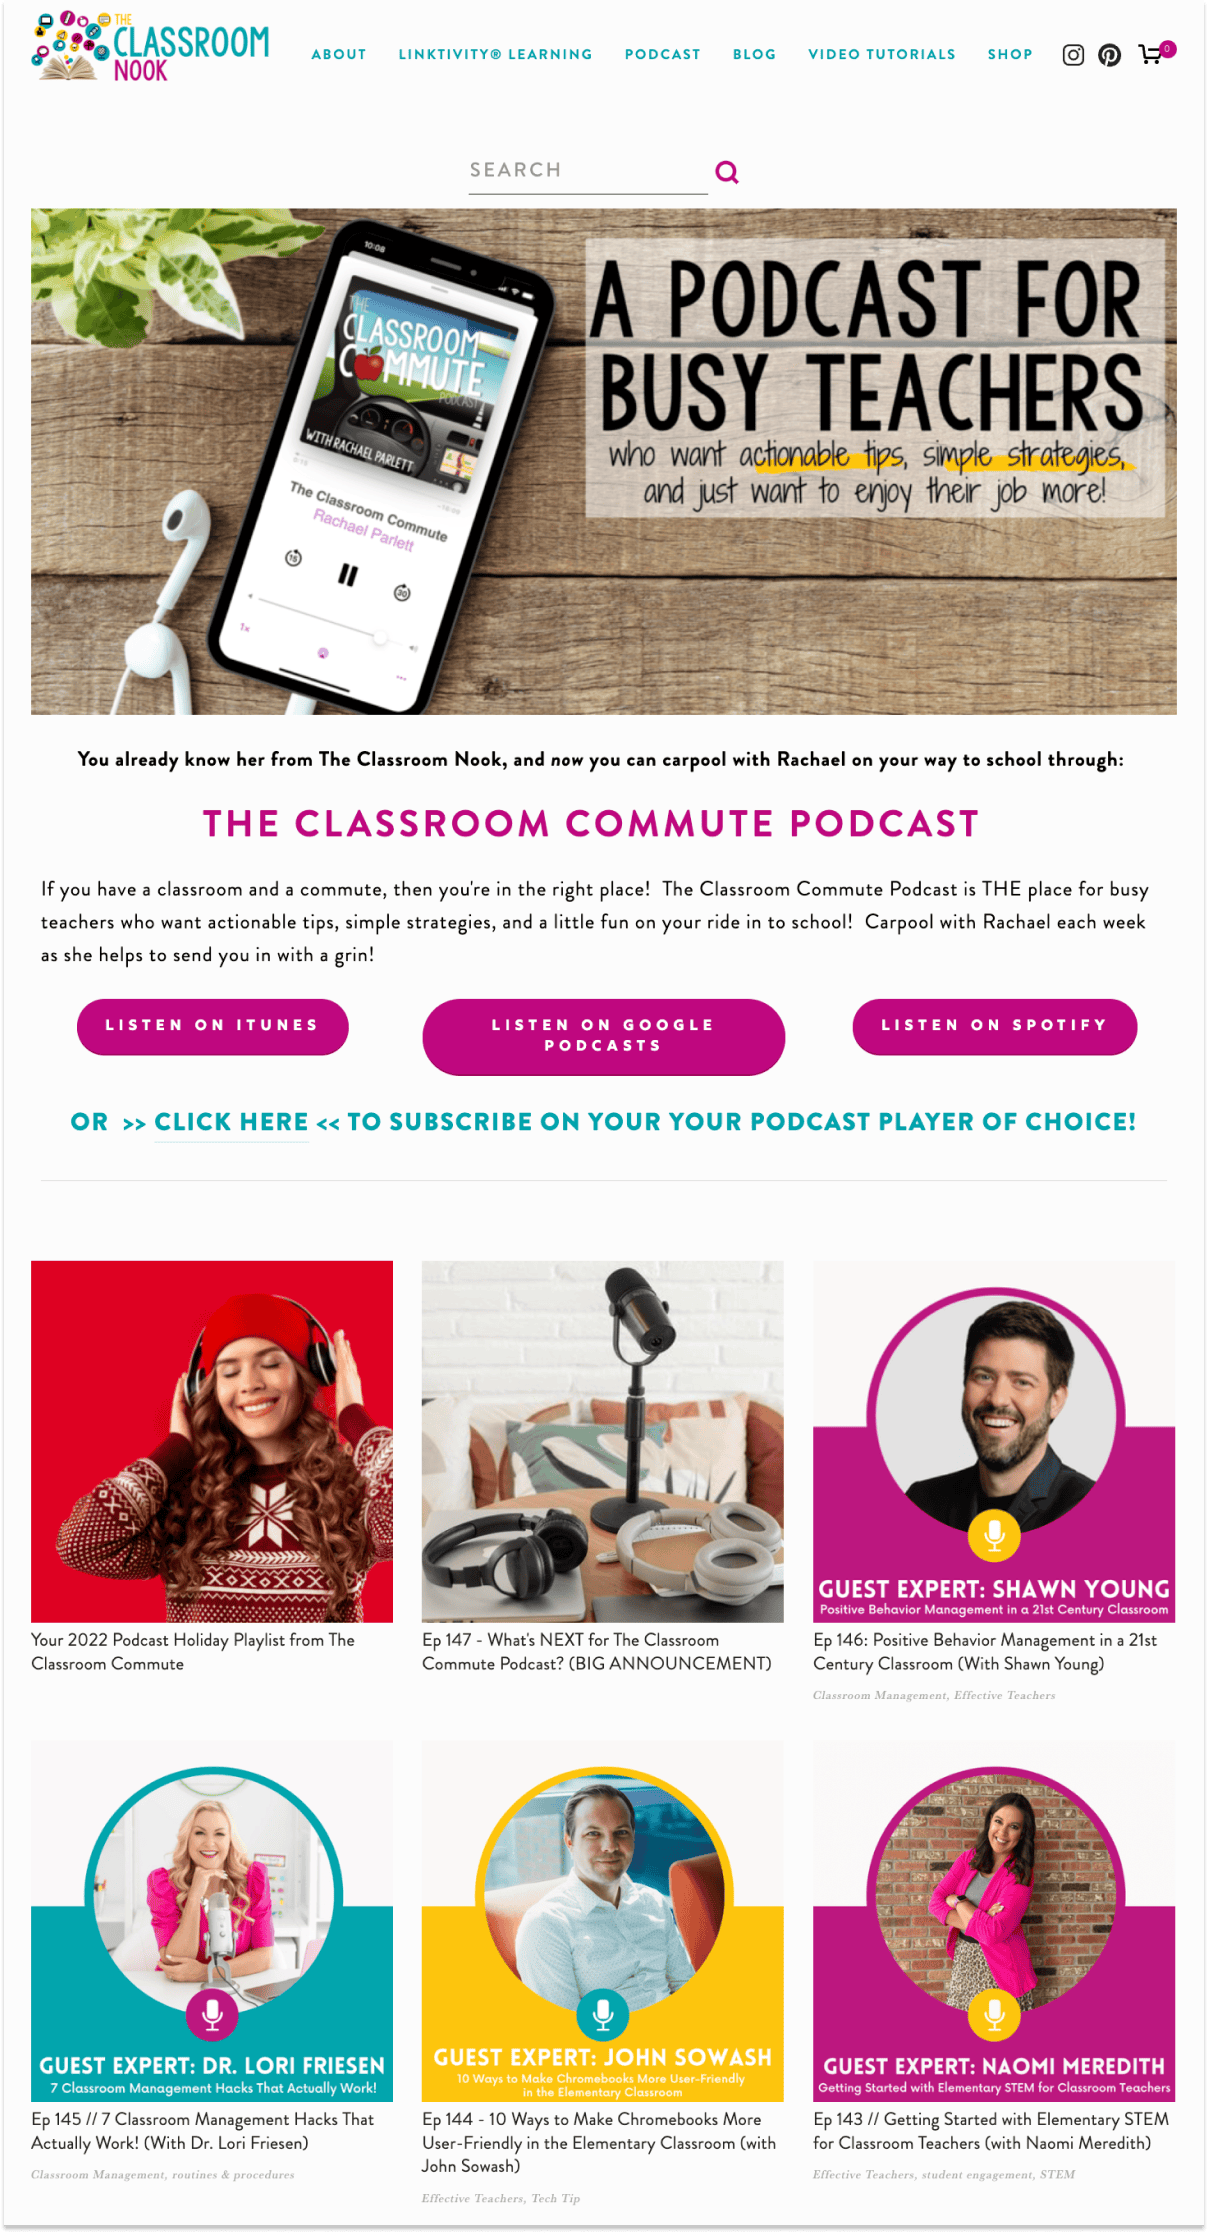 The Classroom Nook podcast home page